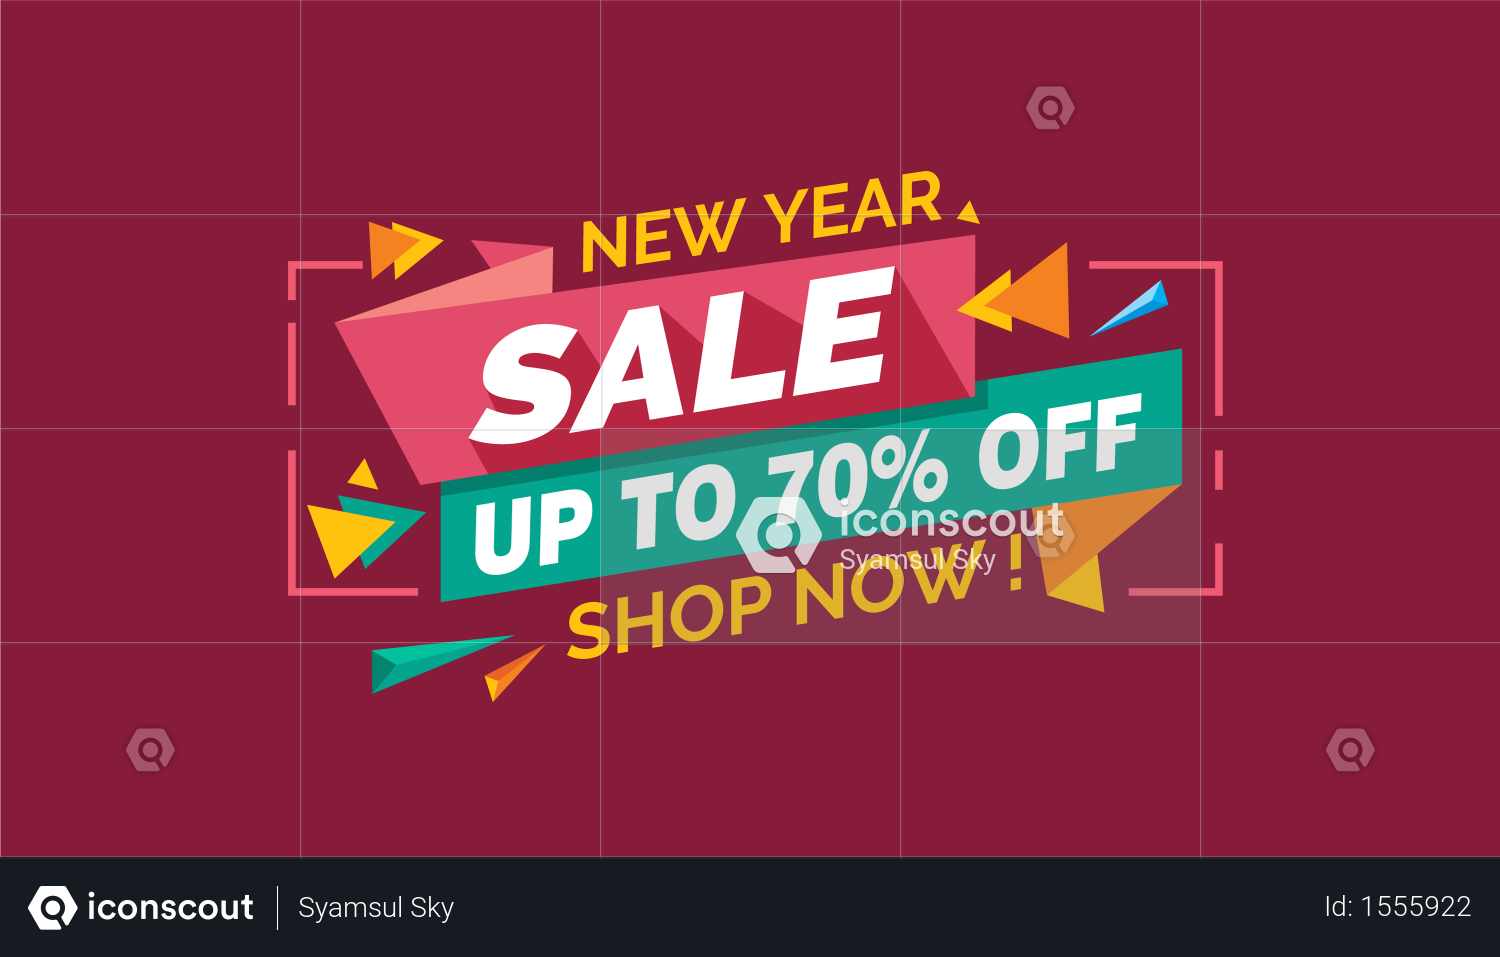 Premium New Year Sale Up To 70 Off Shop Now Illustration